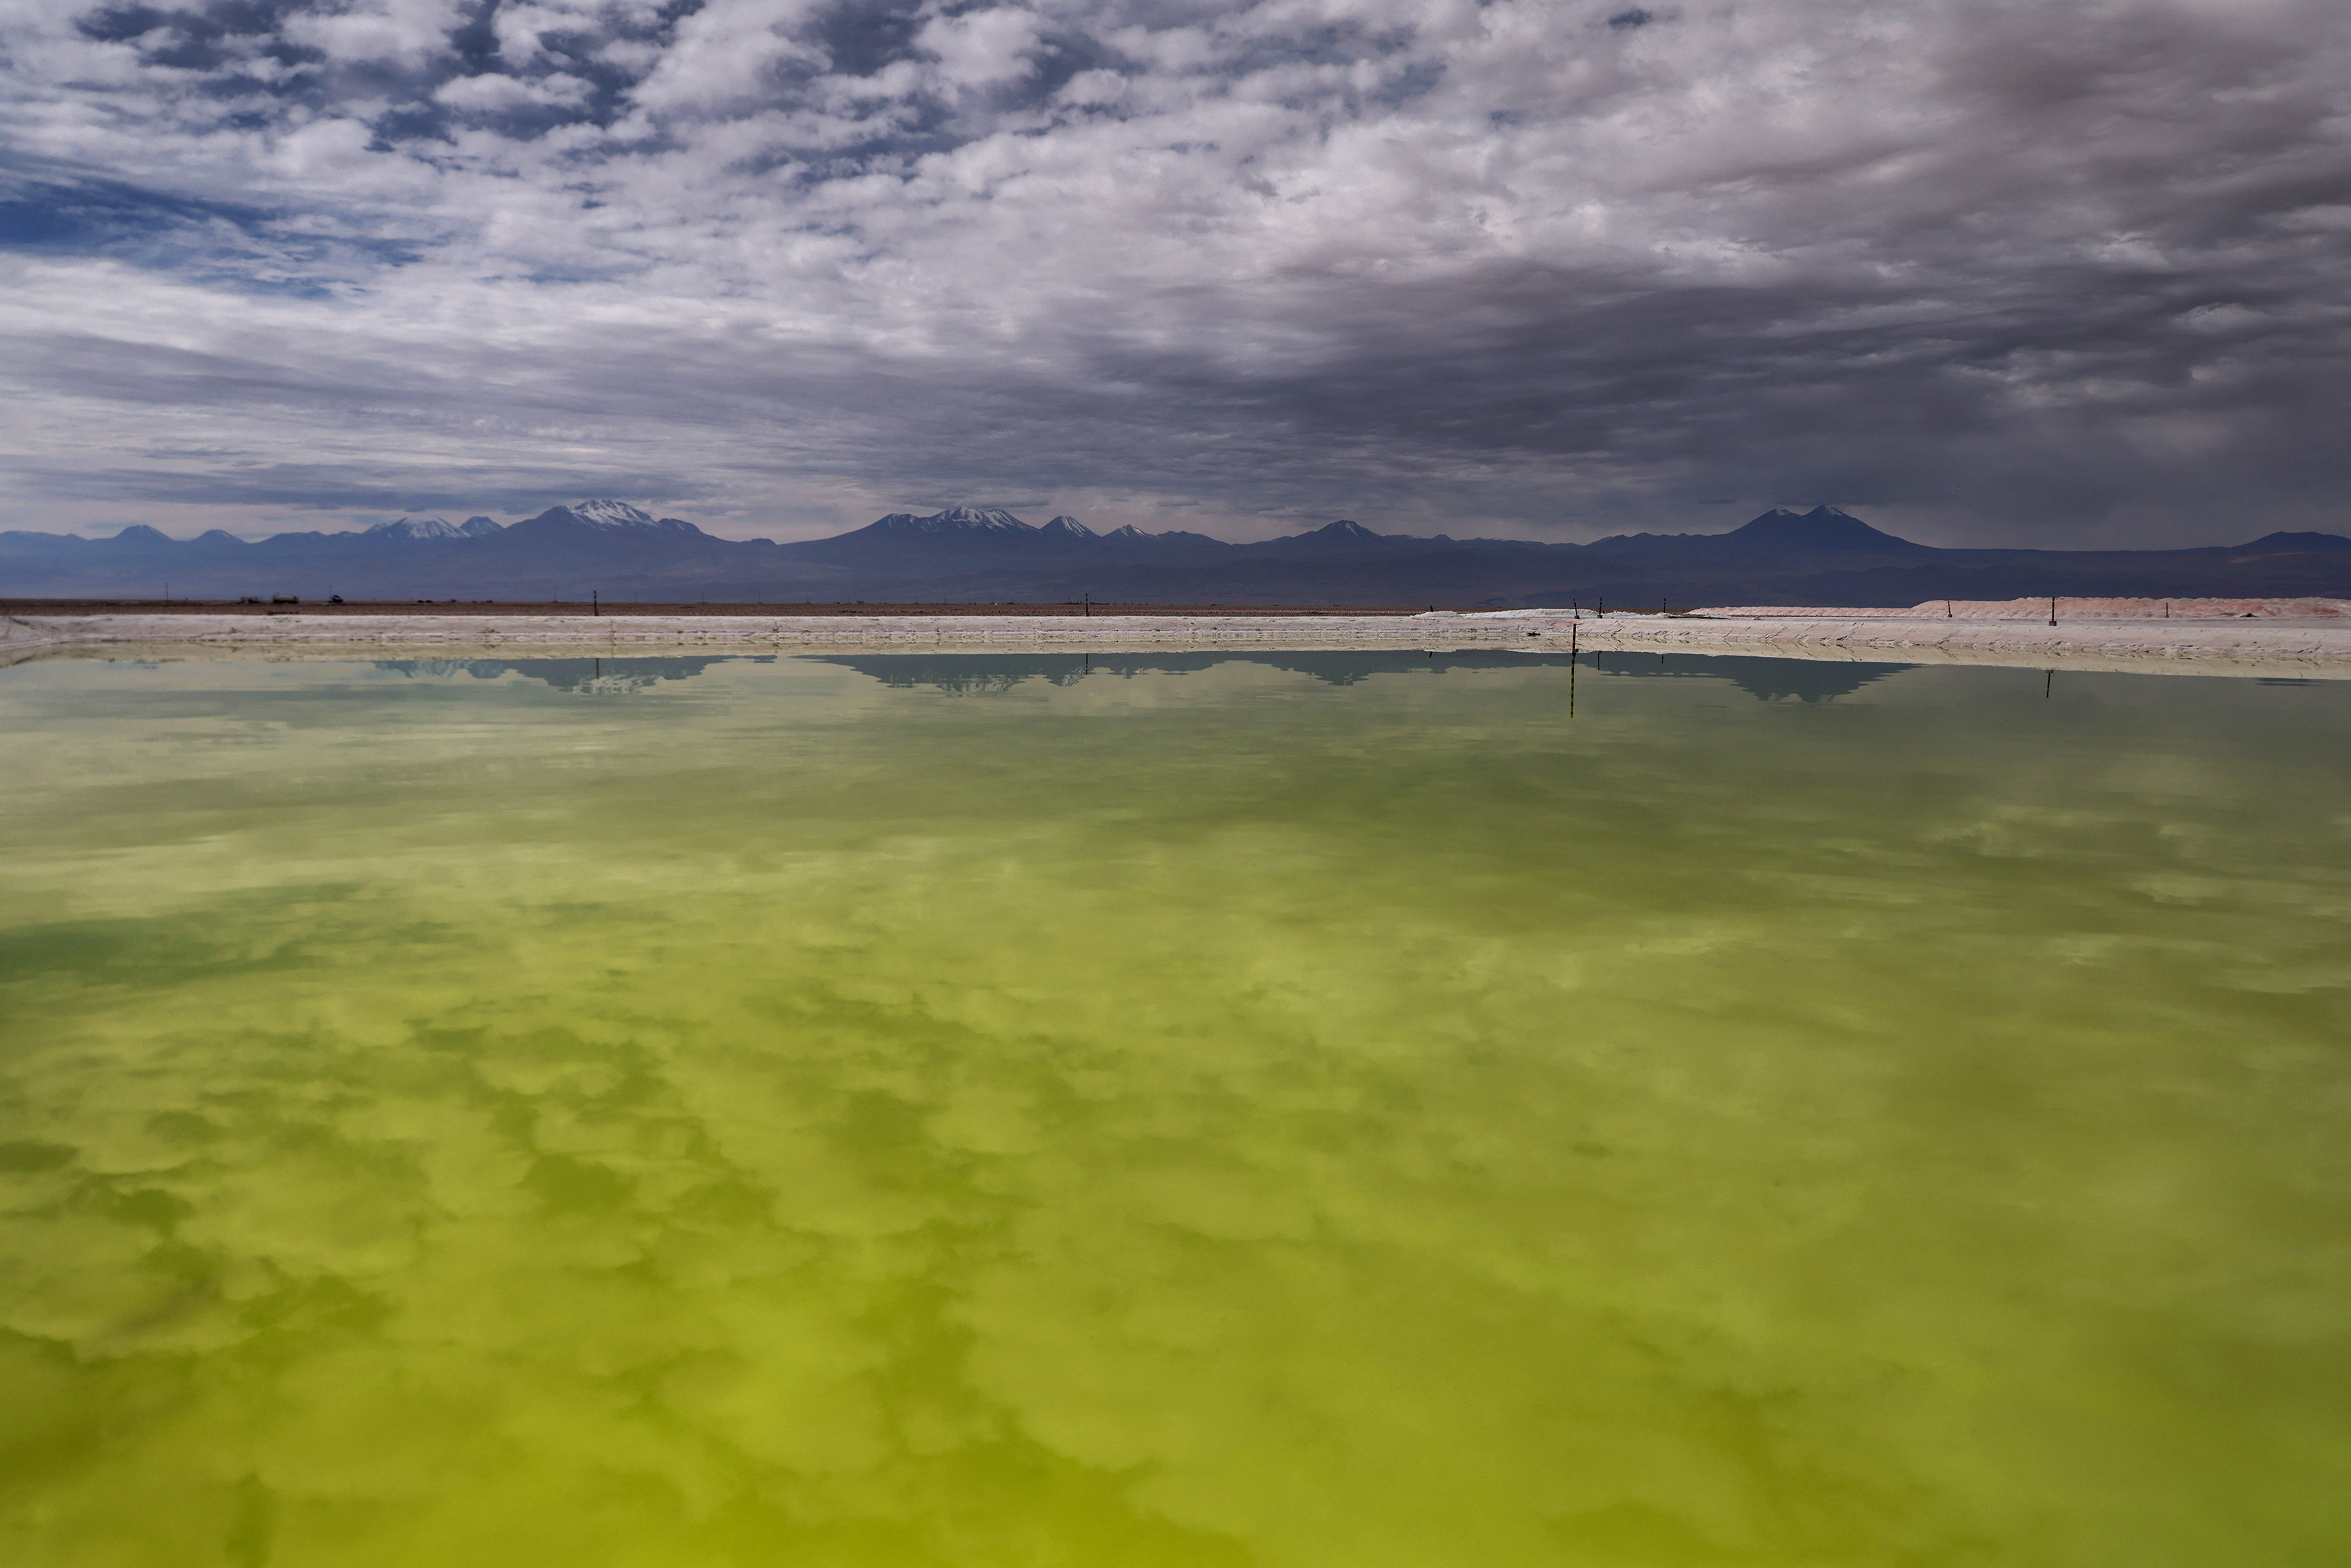 A view shows a concentrate brine pool of Albemarle Chile lithium plant placed on the Atacama salt flat